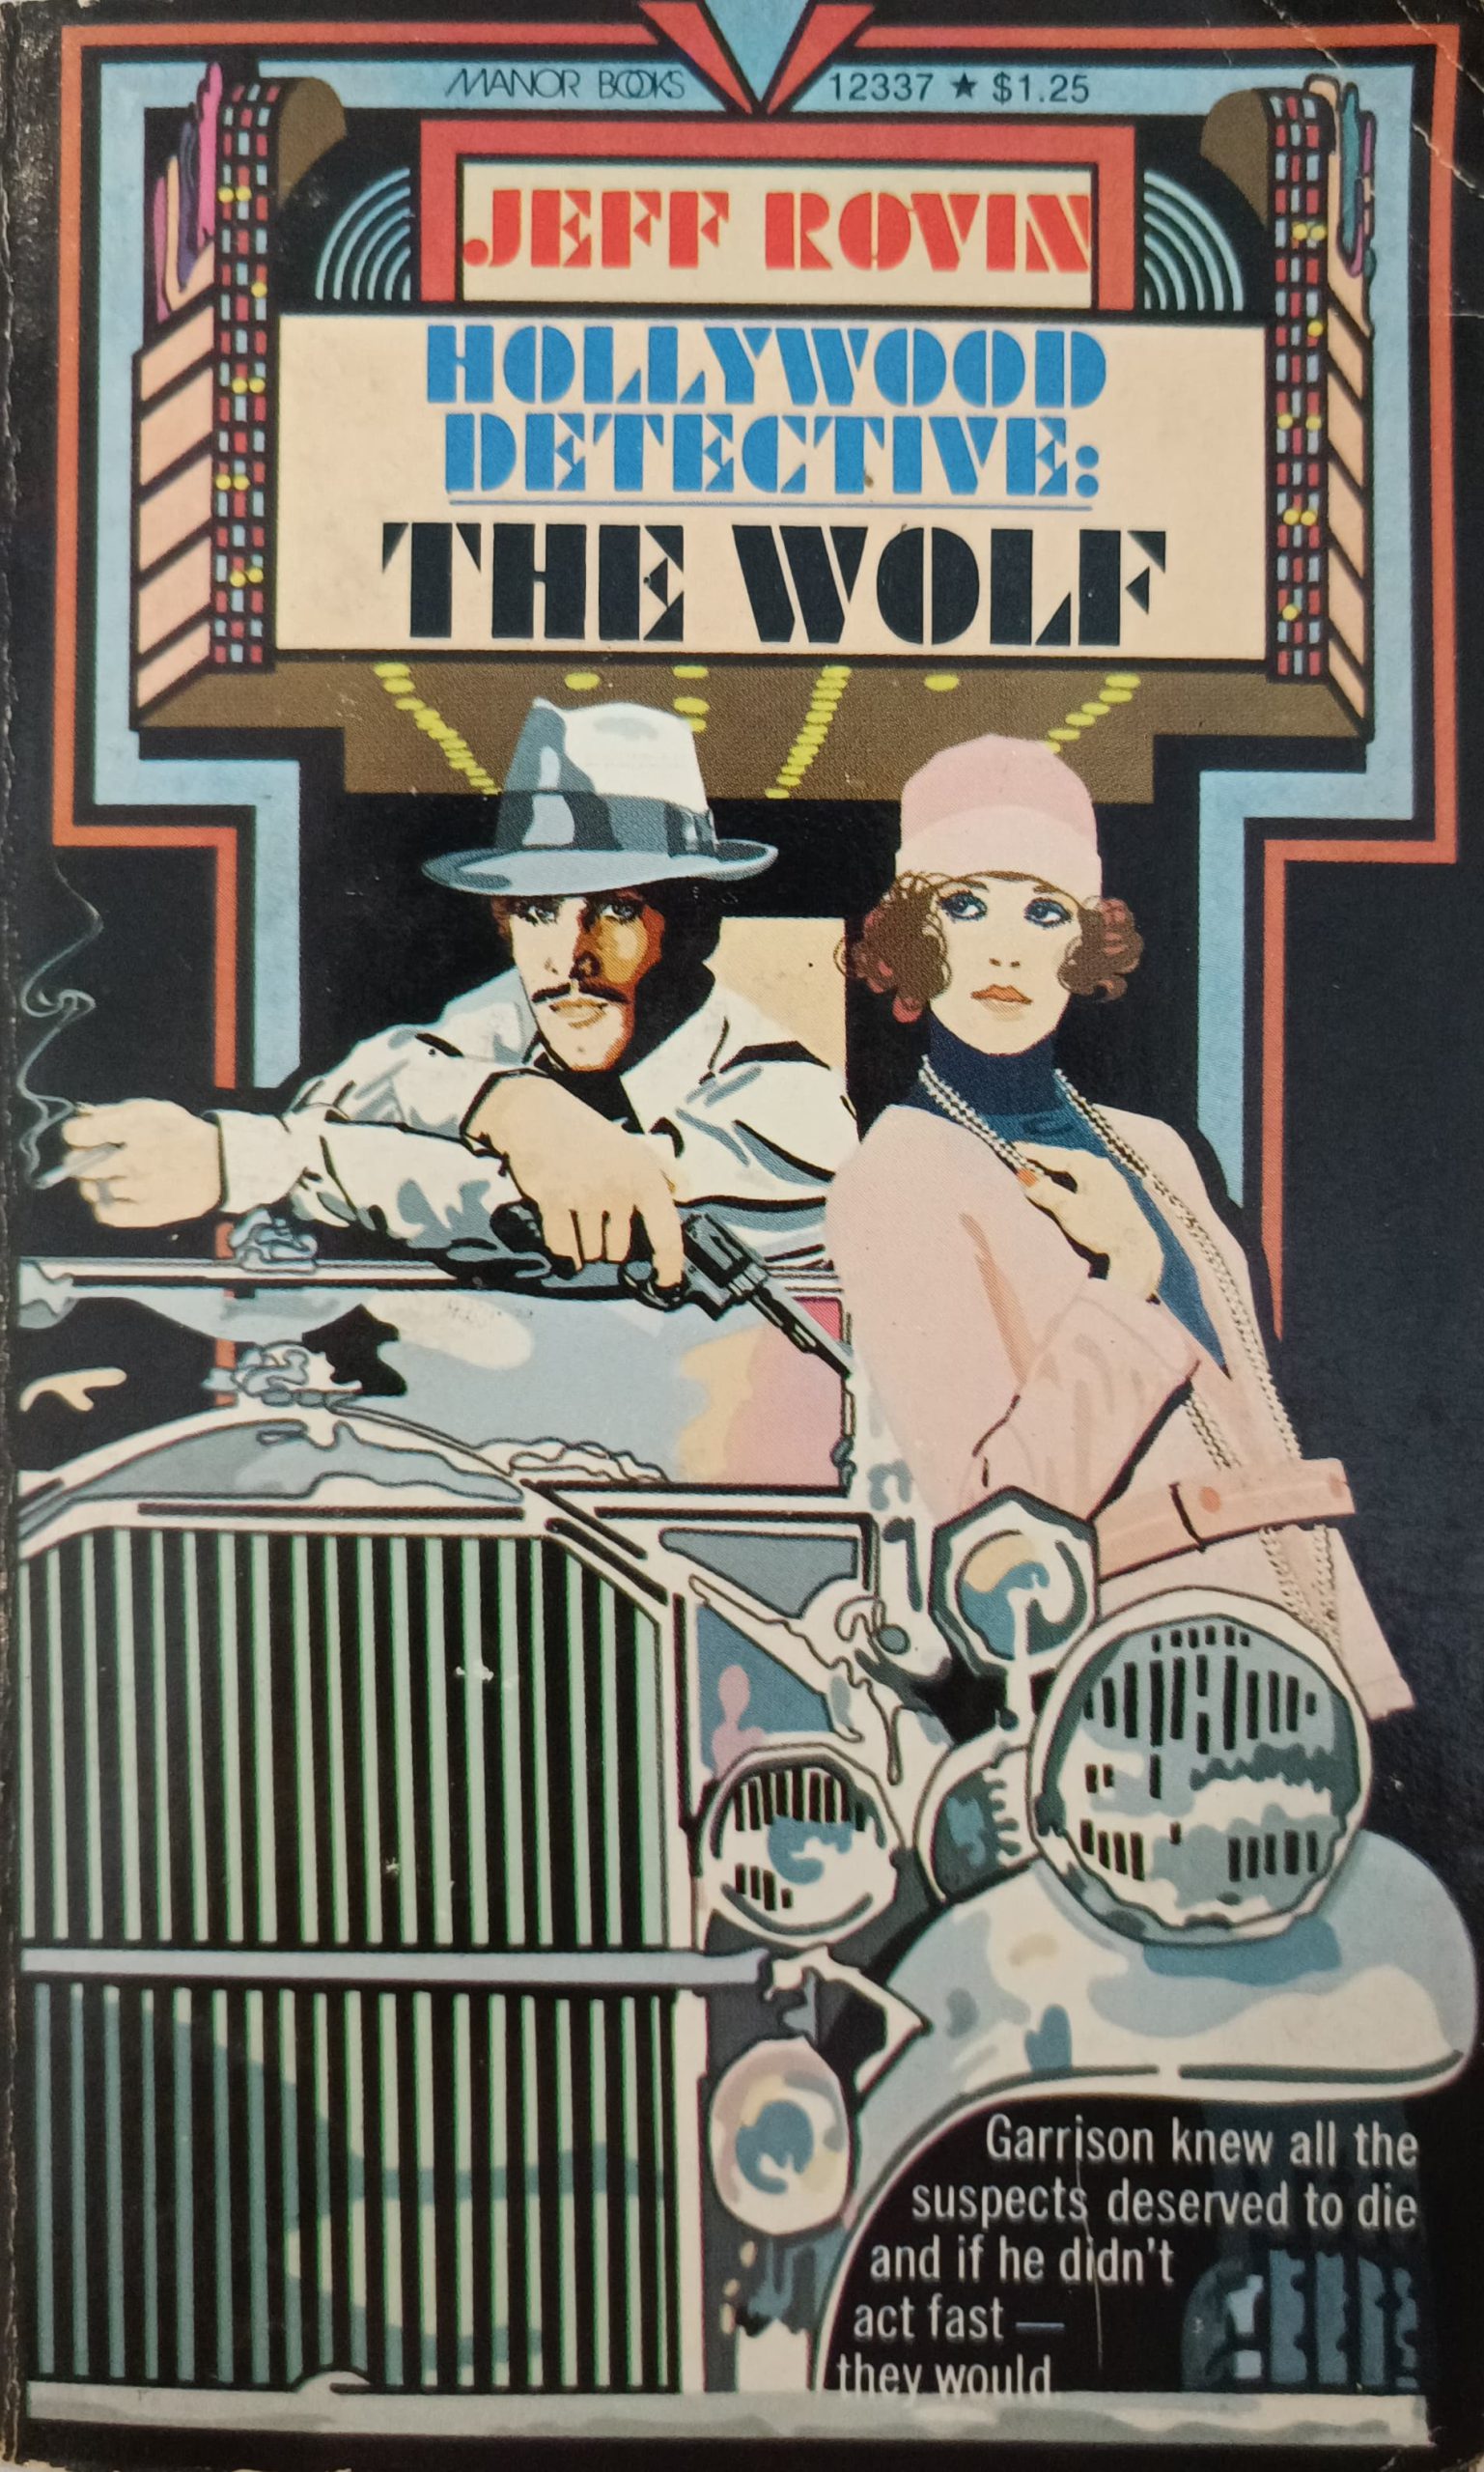 Hollywood Detective: The Wolf | Jeff Rovin